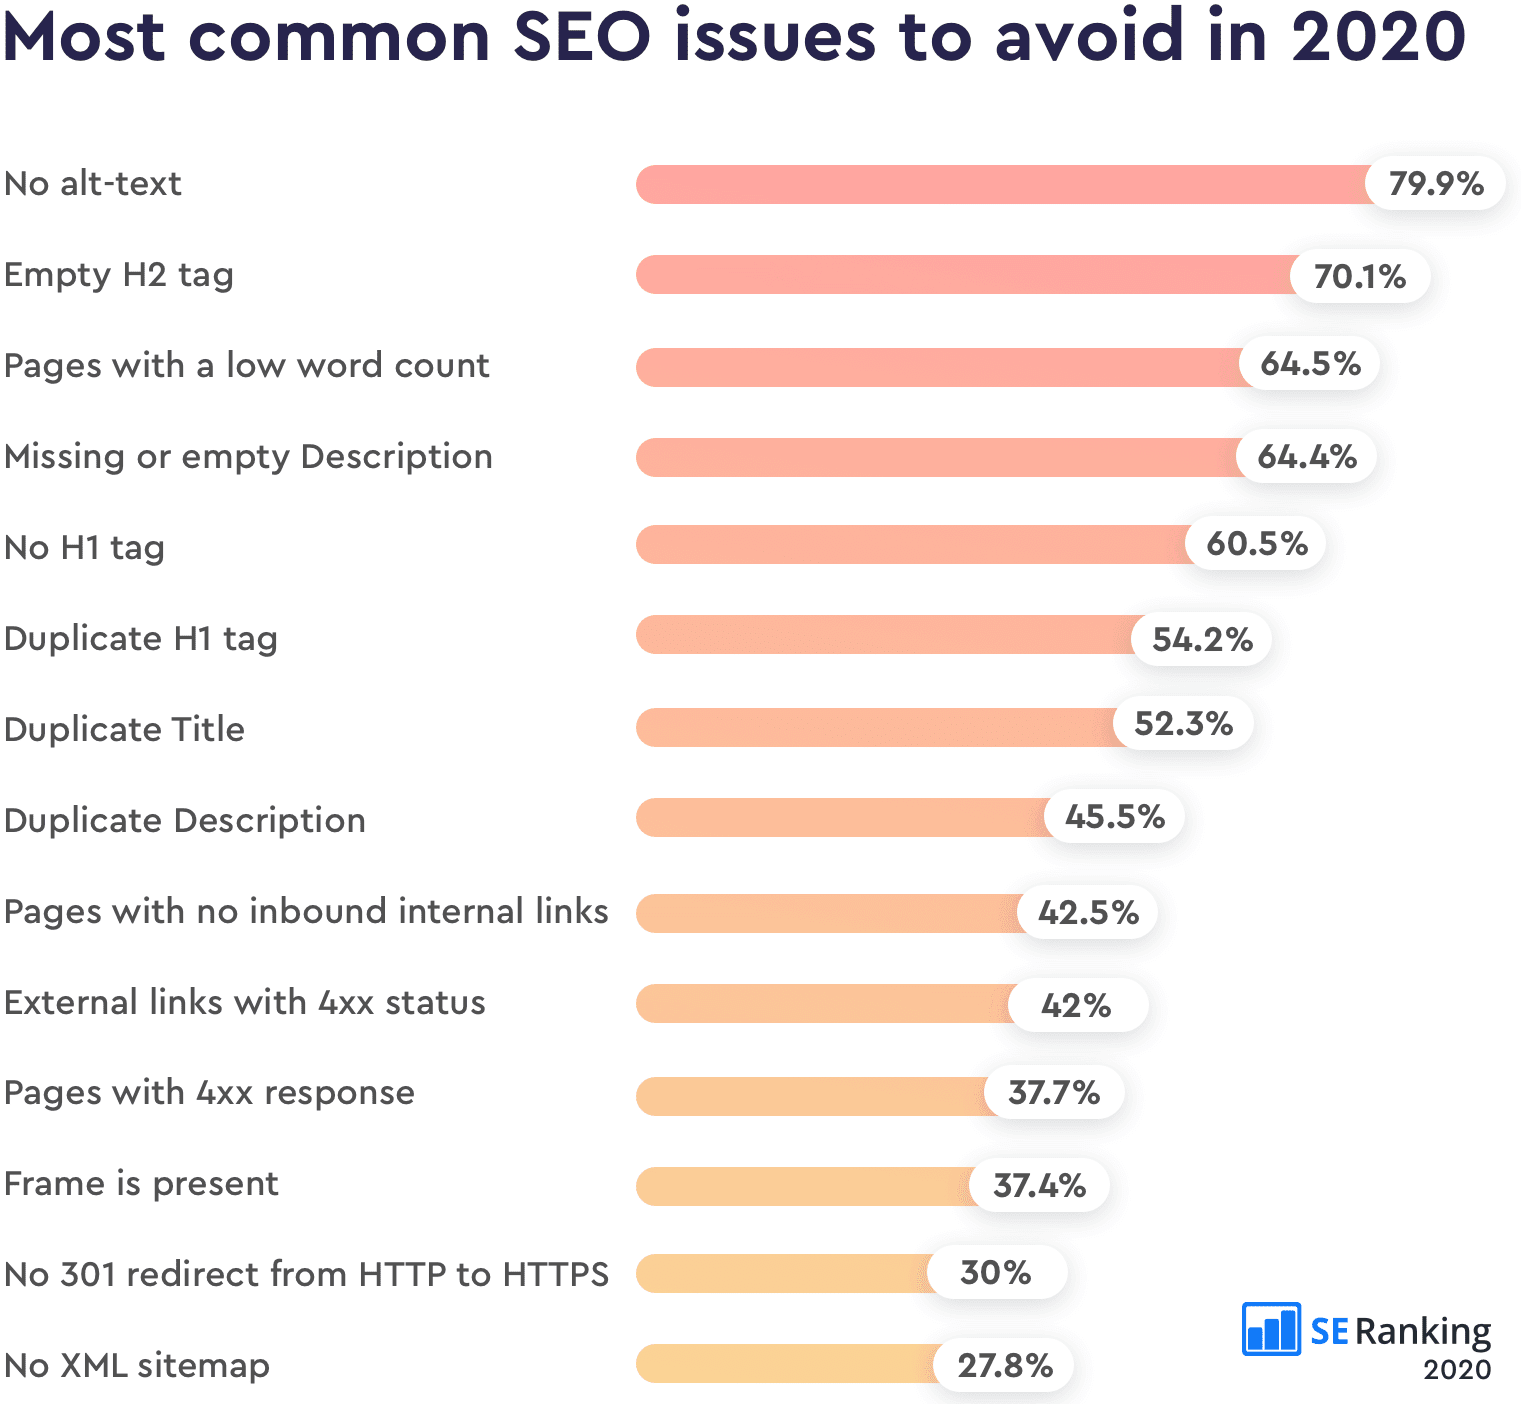 Statistics on SEO issues according to SE Ranking